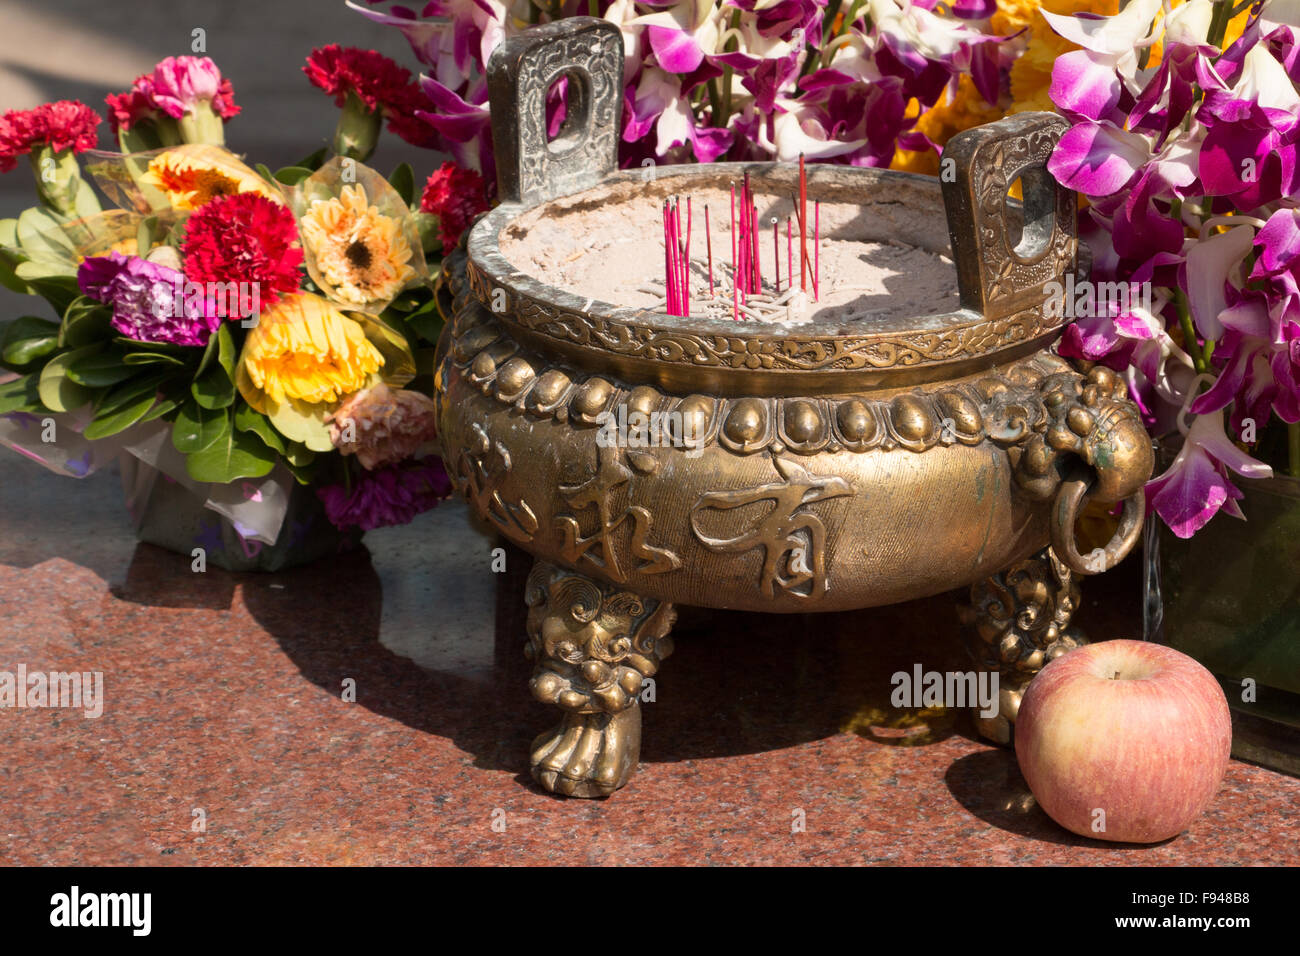 Chinese pot with incense sticks in front of a colored flower arrangement with an apple Stock Photo